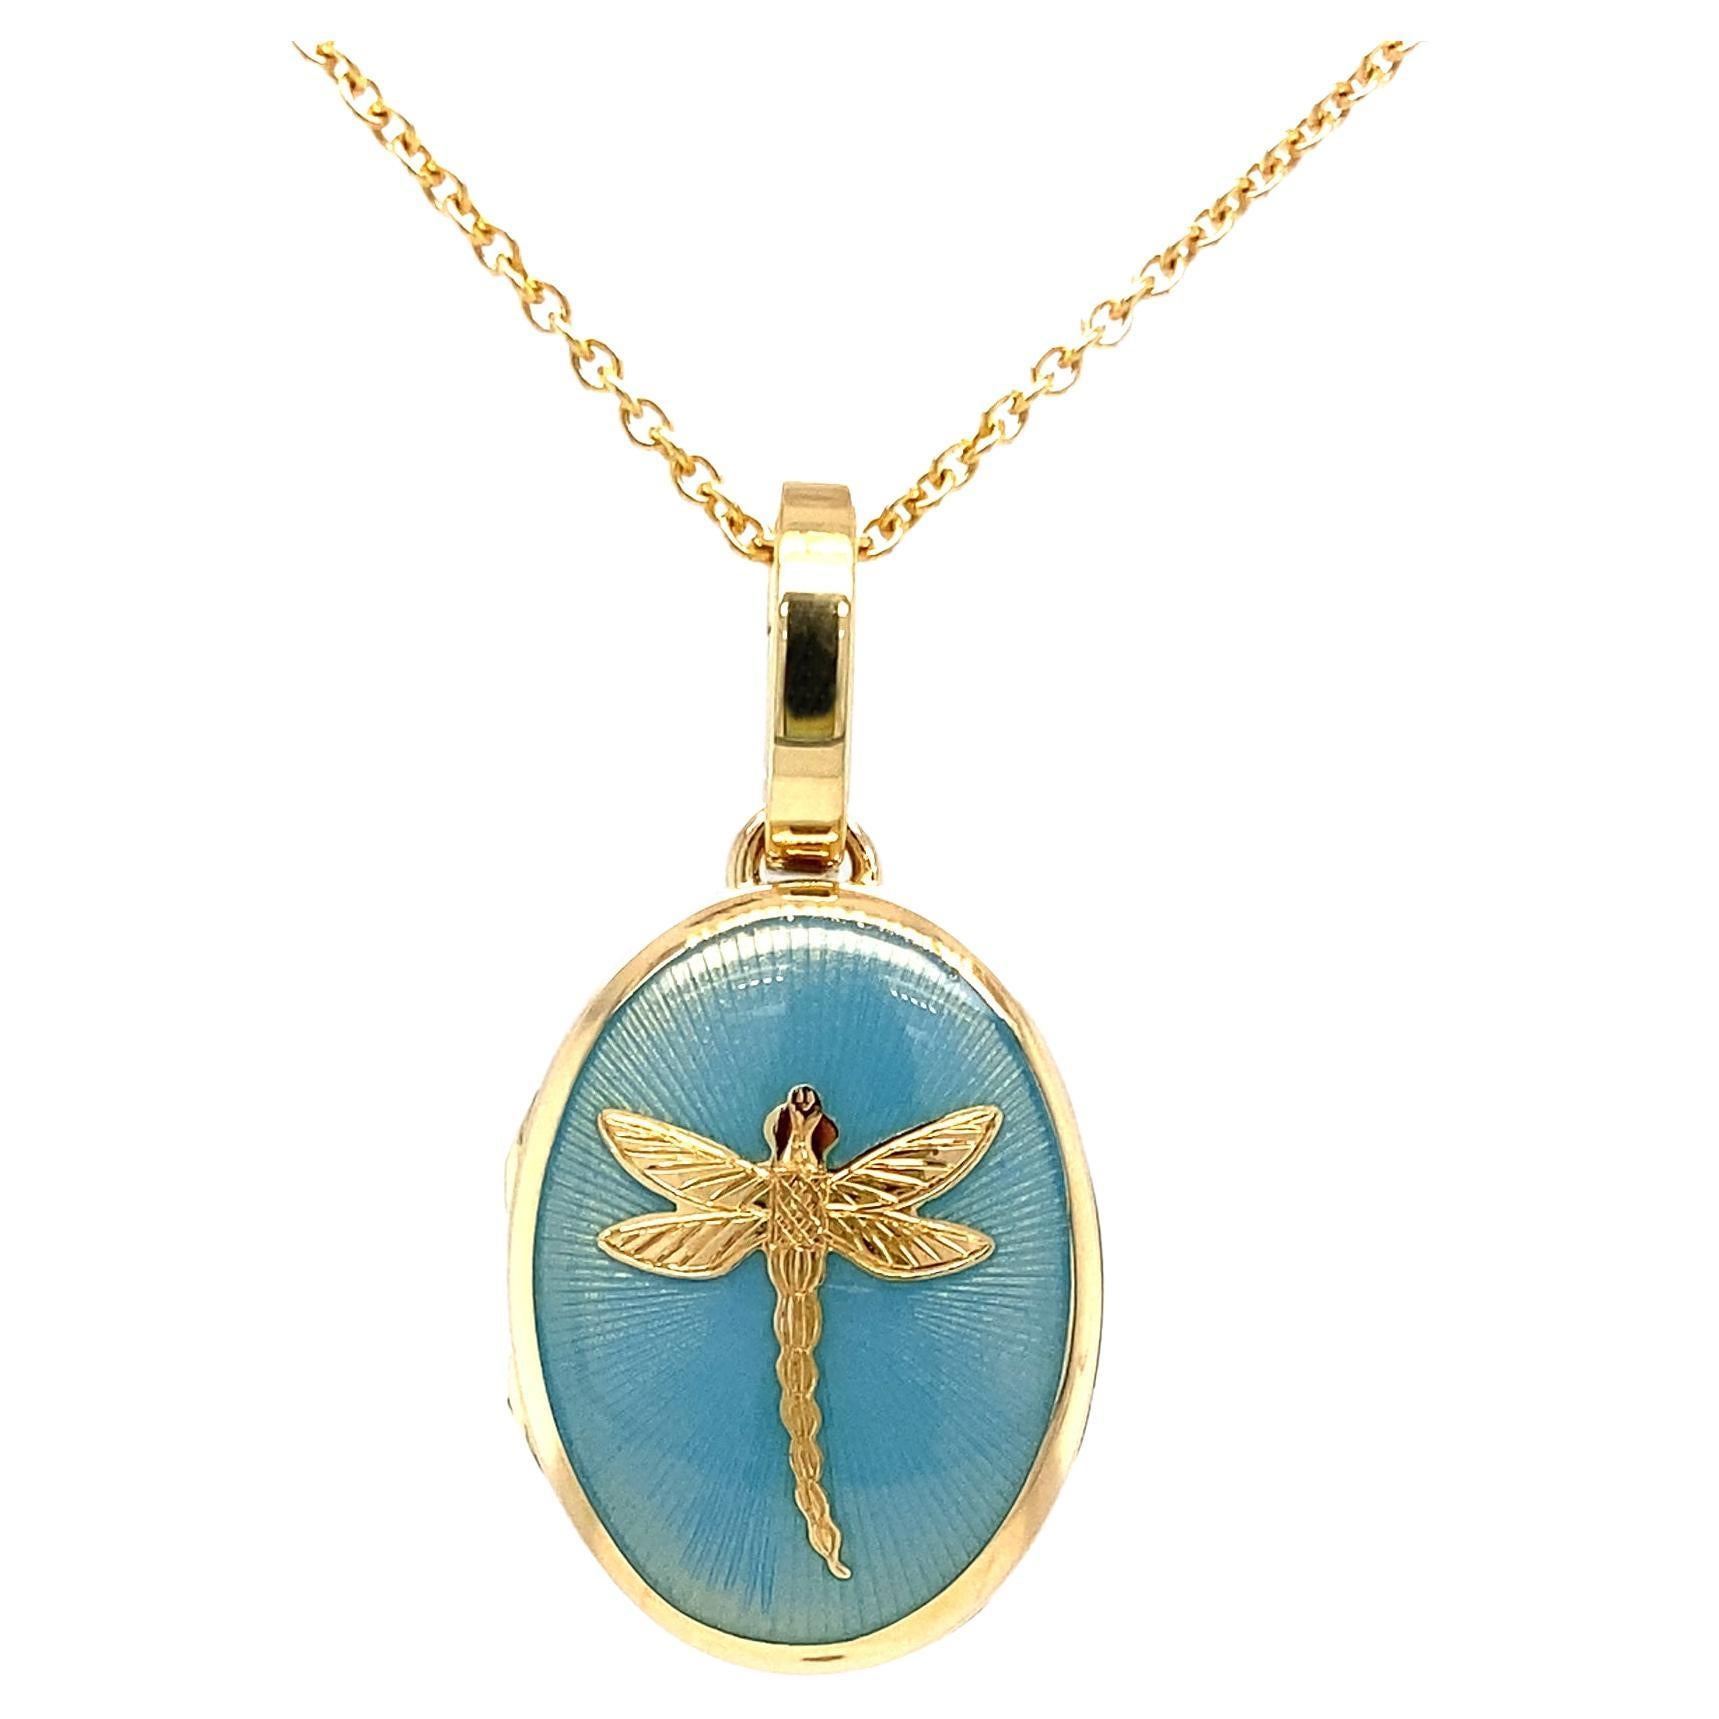 Oval Locket Pendant Dragonfly 18k Yellow Gold Opalescent Turquoise Enamel For Sale